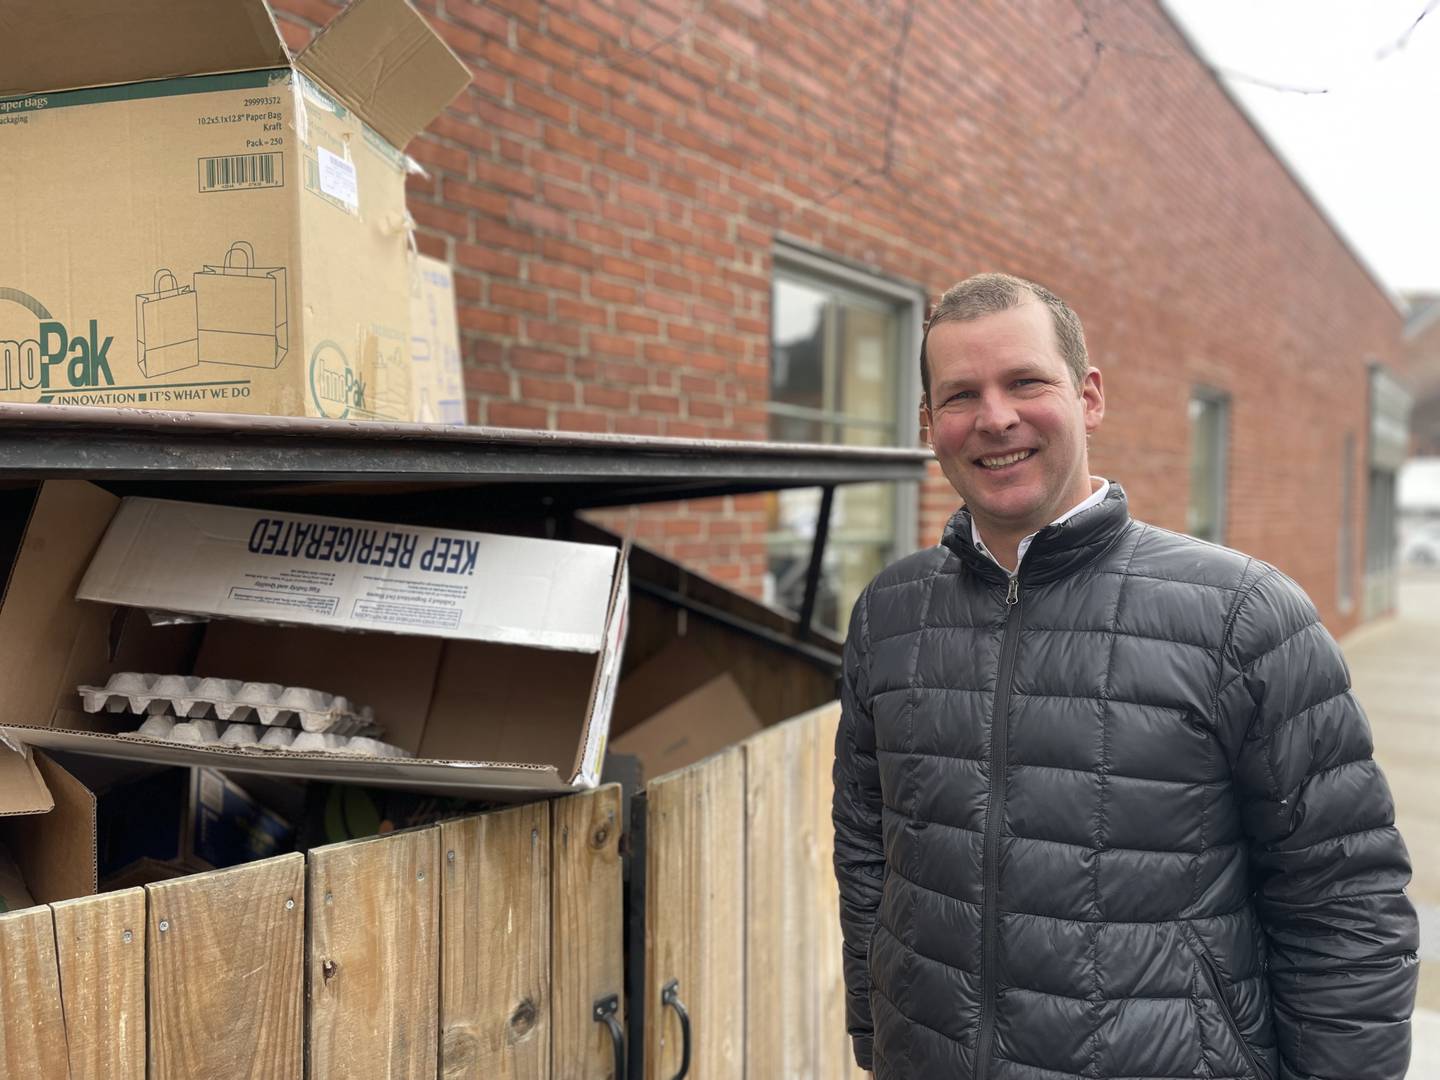 Mark Hollak, founder of Mundea, stands next to the recycling bin at Pitango in Fells Point. Hollak is on a mission to divert trash from landfills in Baltimore and beyond.